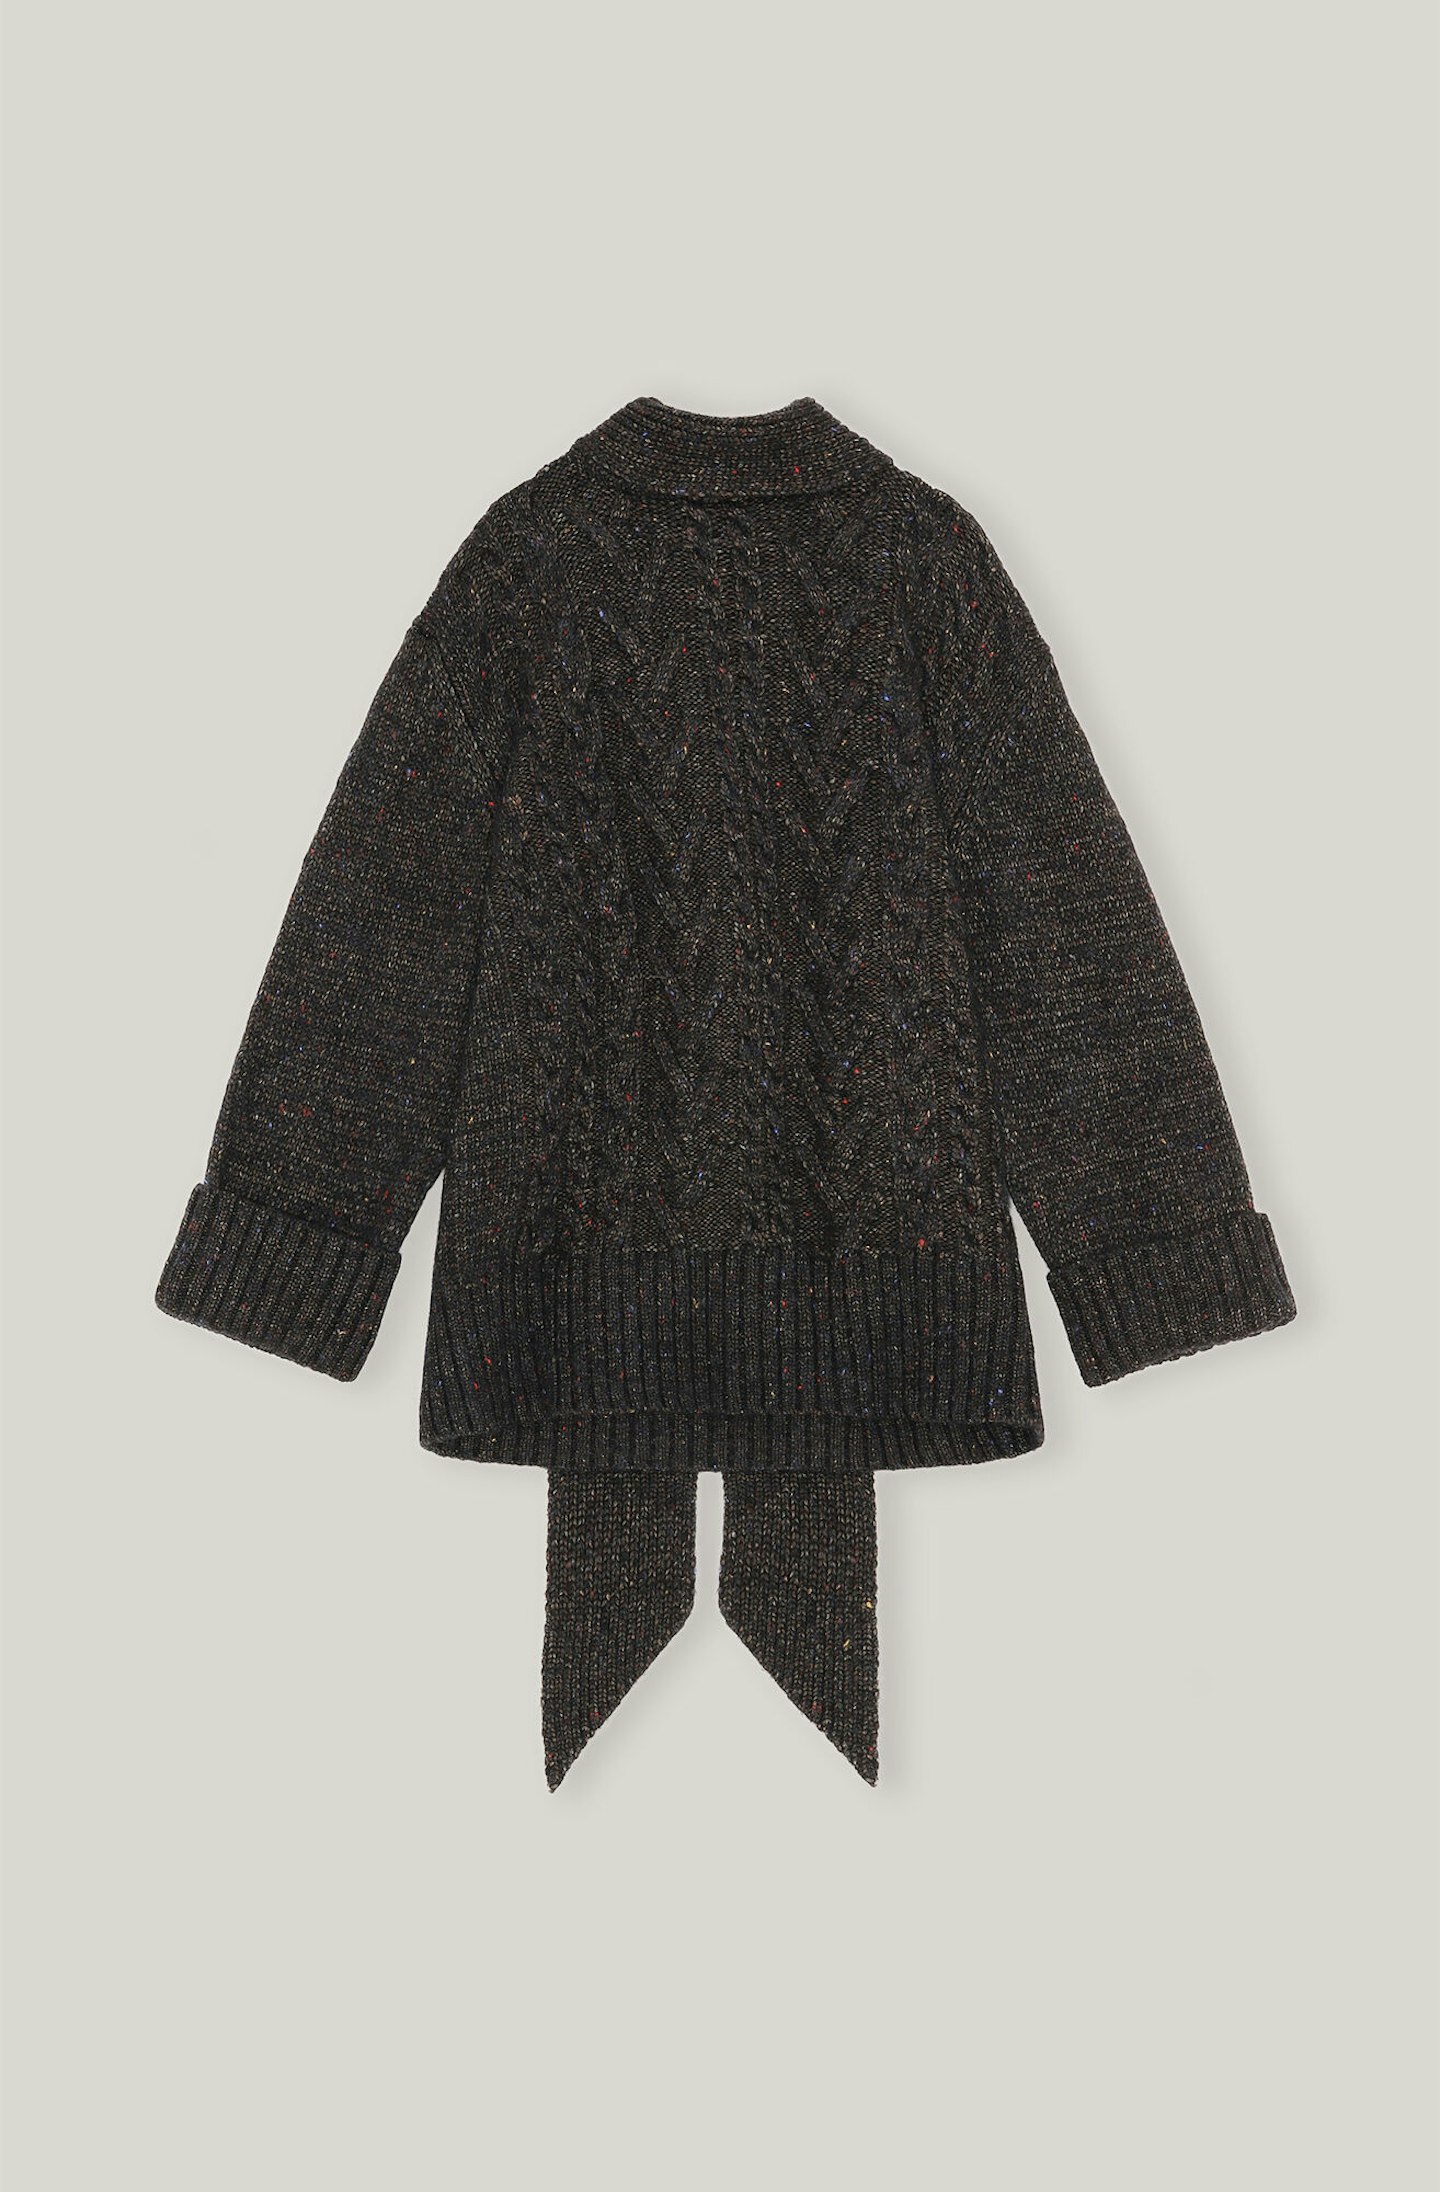 Ganni, Cable Oversized Tie Turtleneck Pullover, £345